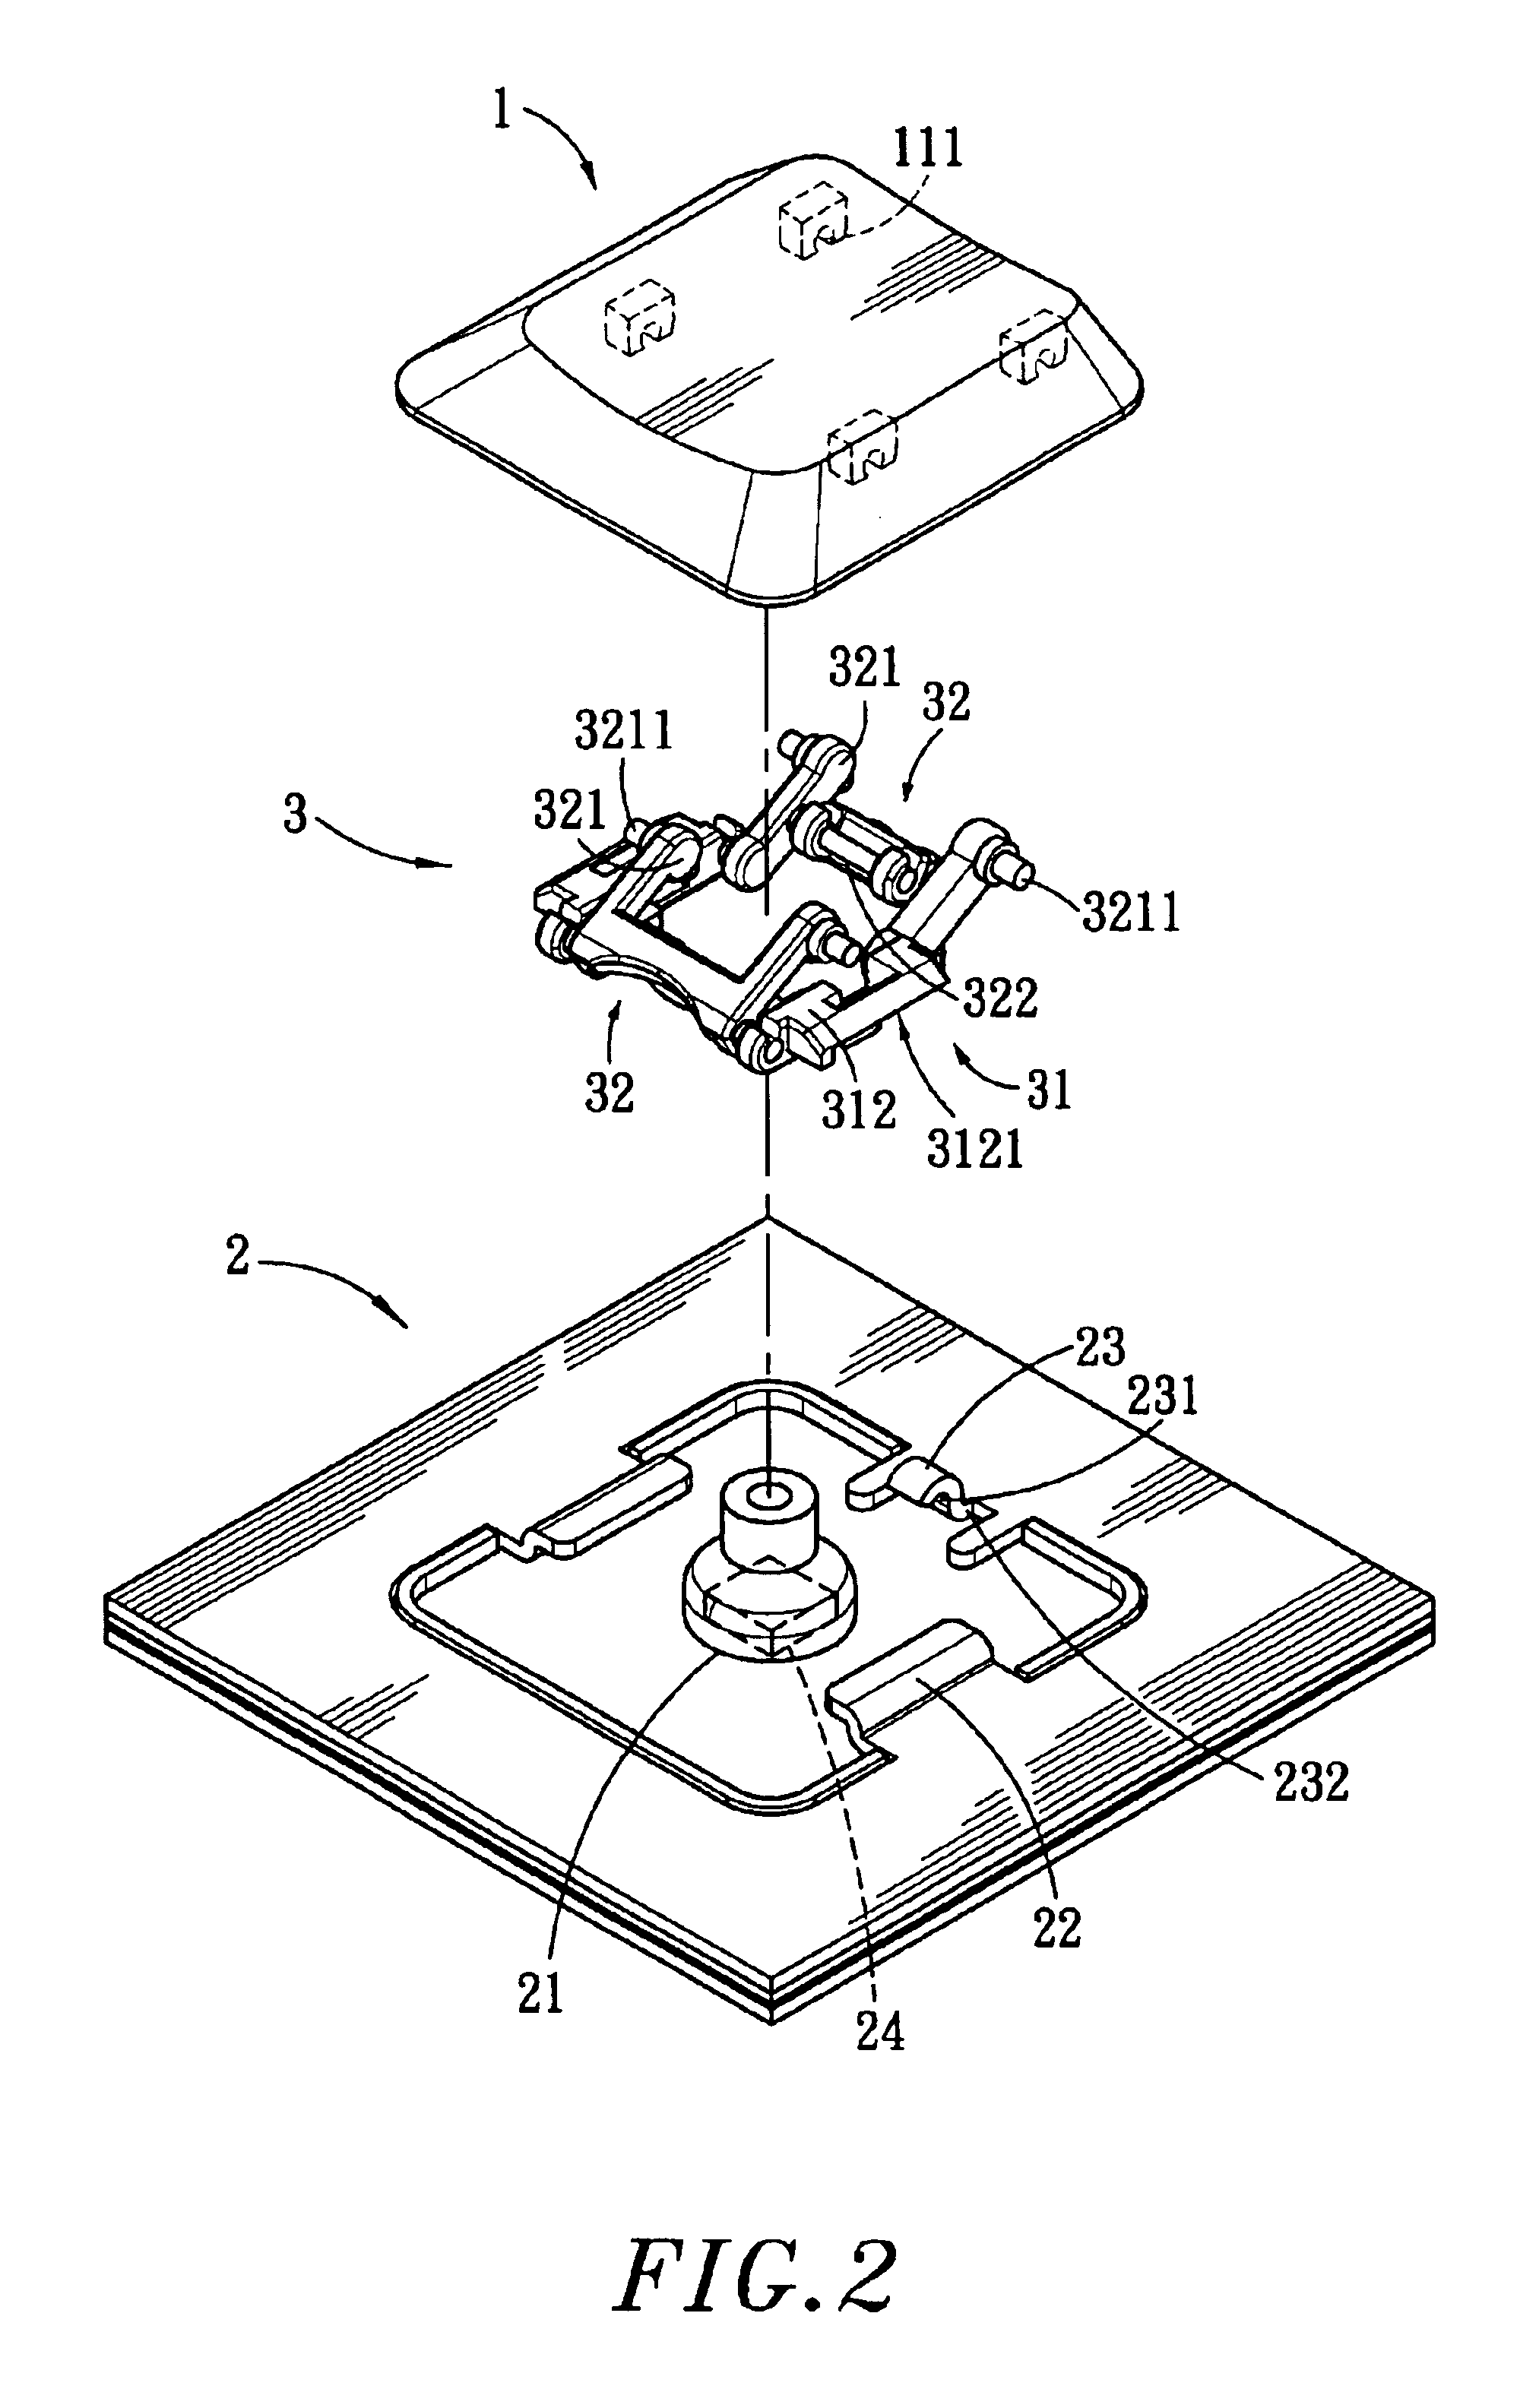 Structure of button for electronic product